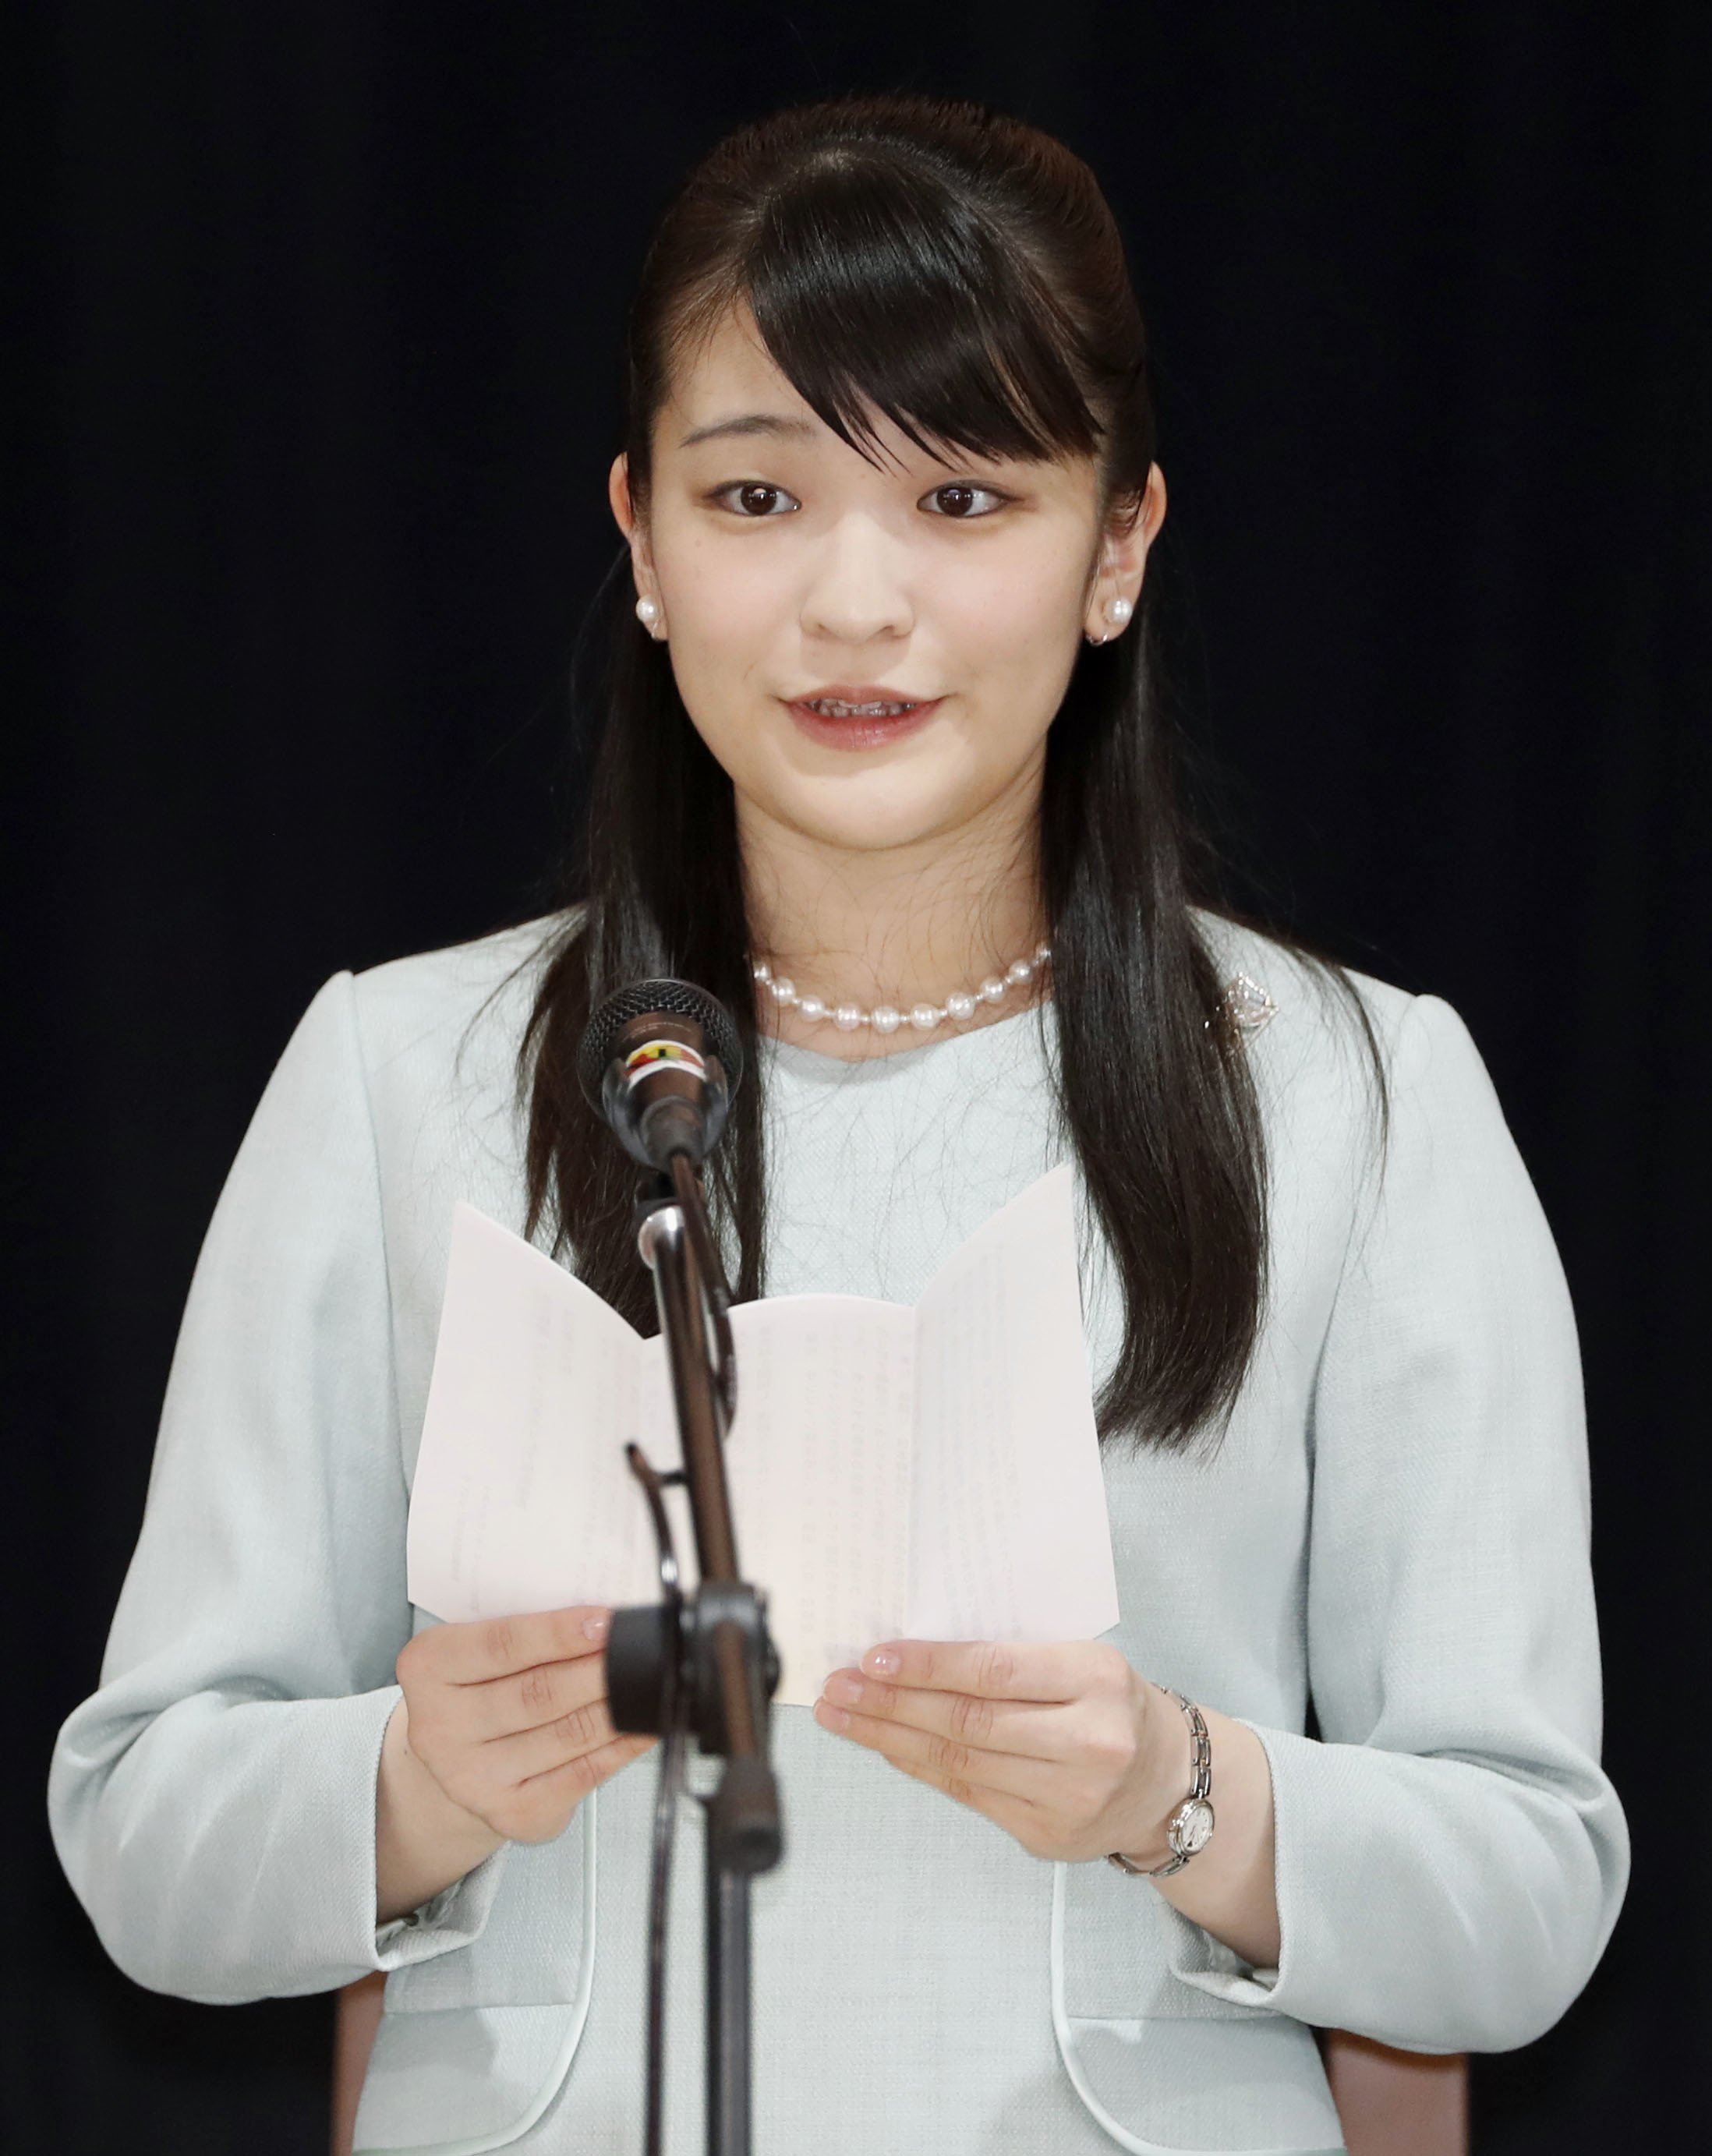 Japanese Princess Mako speaks at a luncheon to welcome her held at a community hall in San Juan, Bolivia, on July 18, 2019 | Source: Getty Images